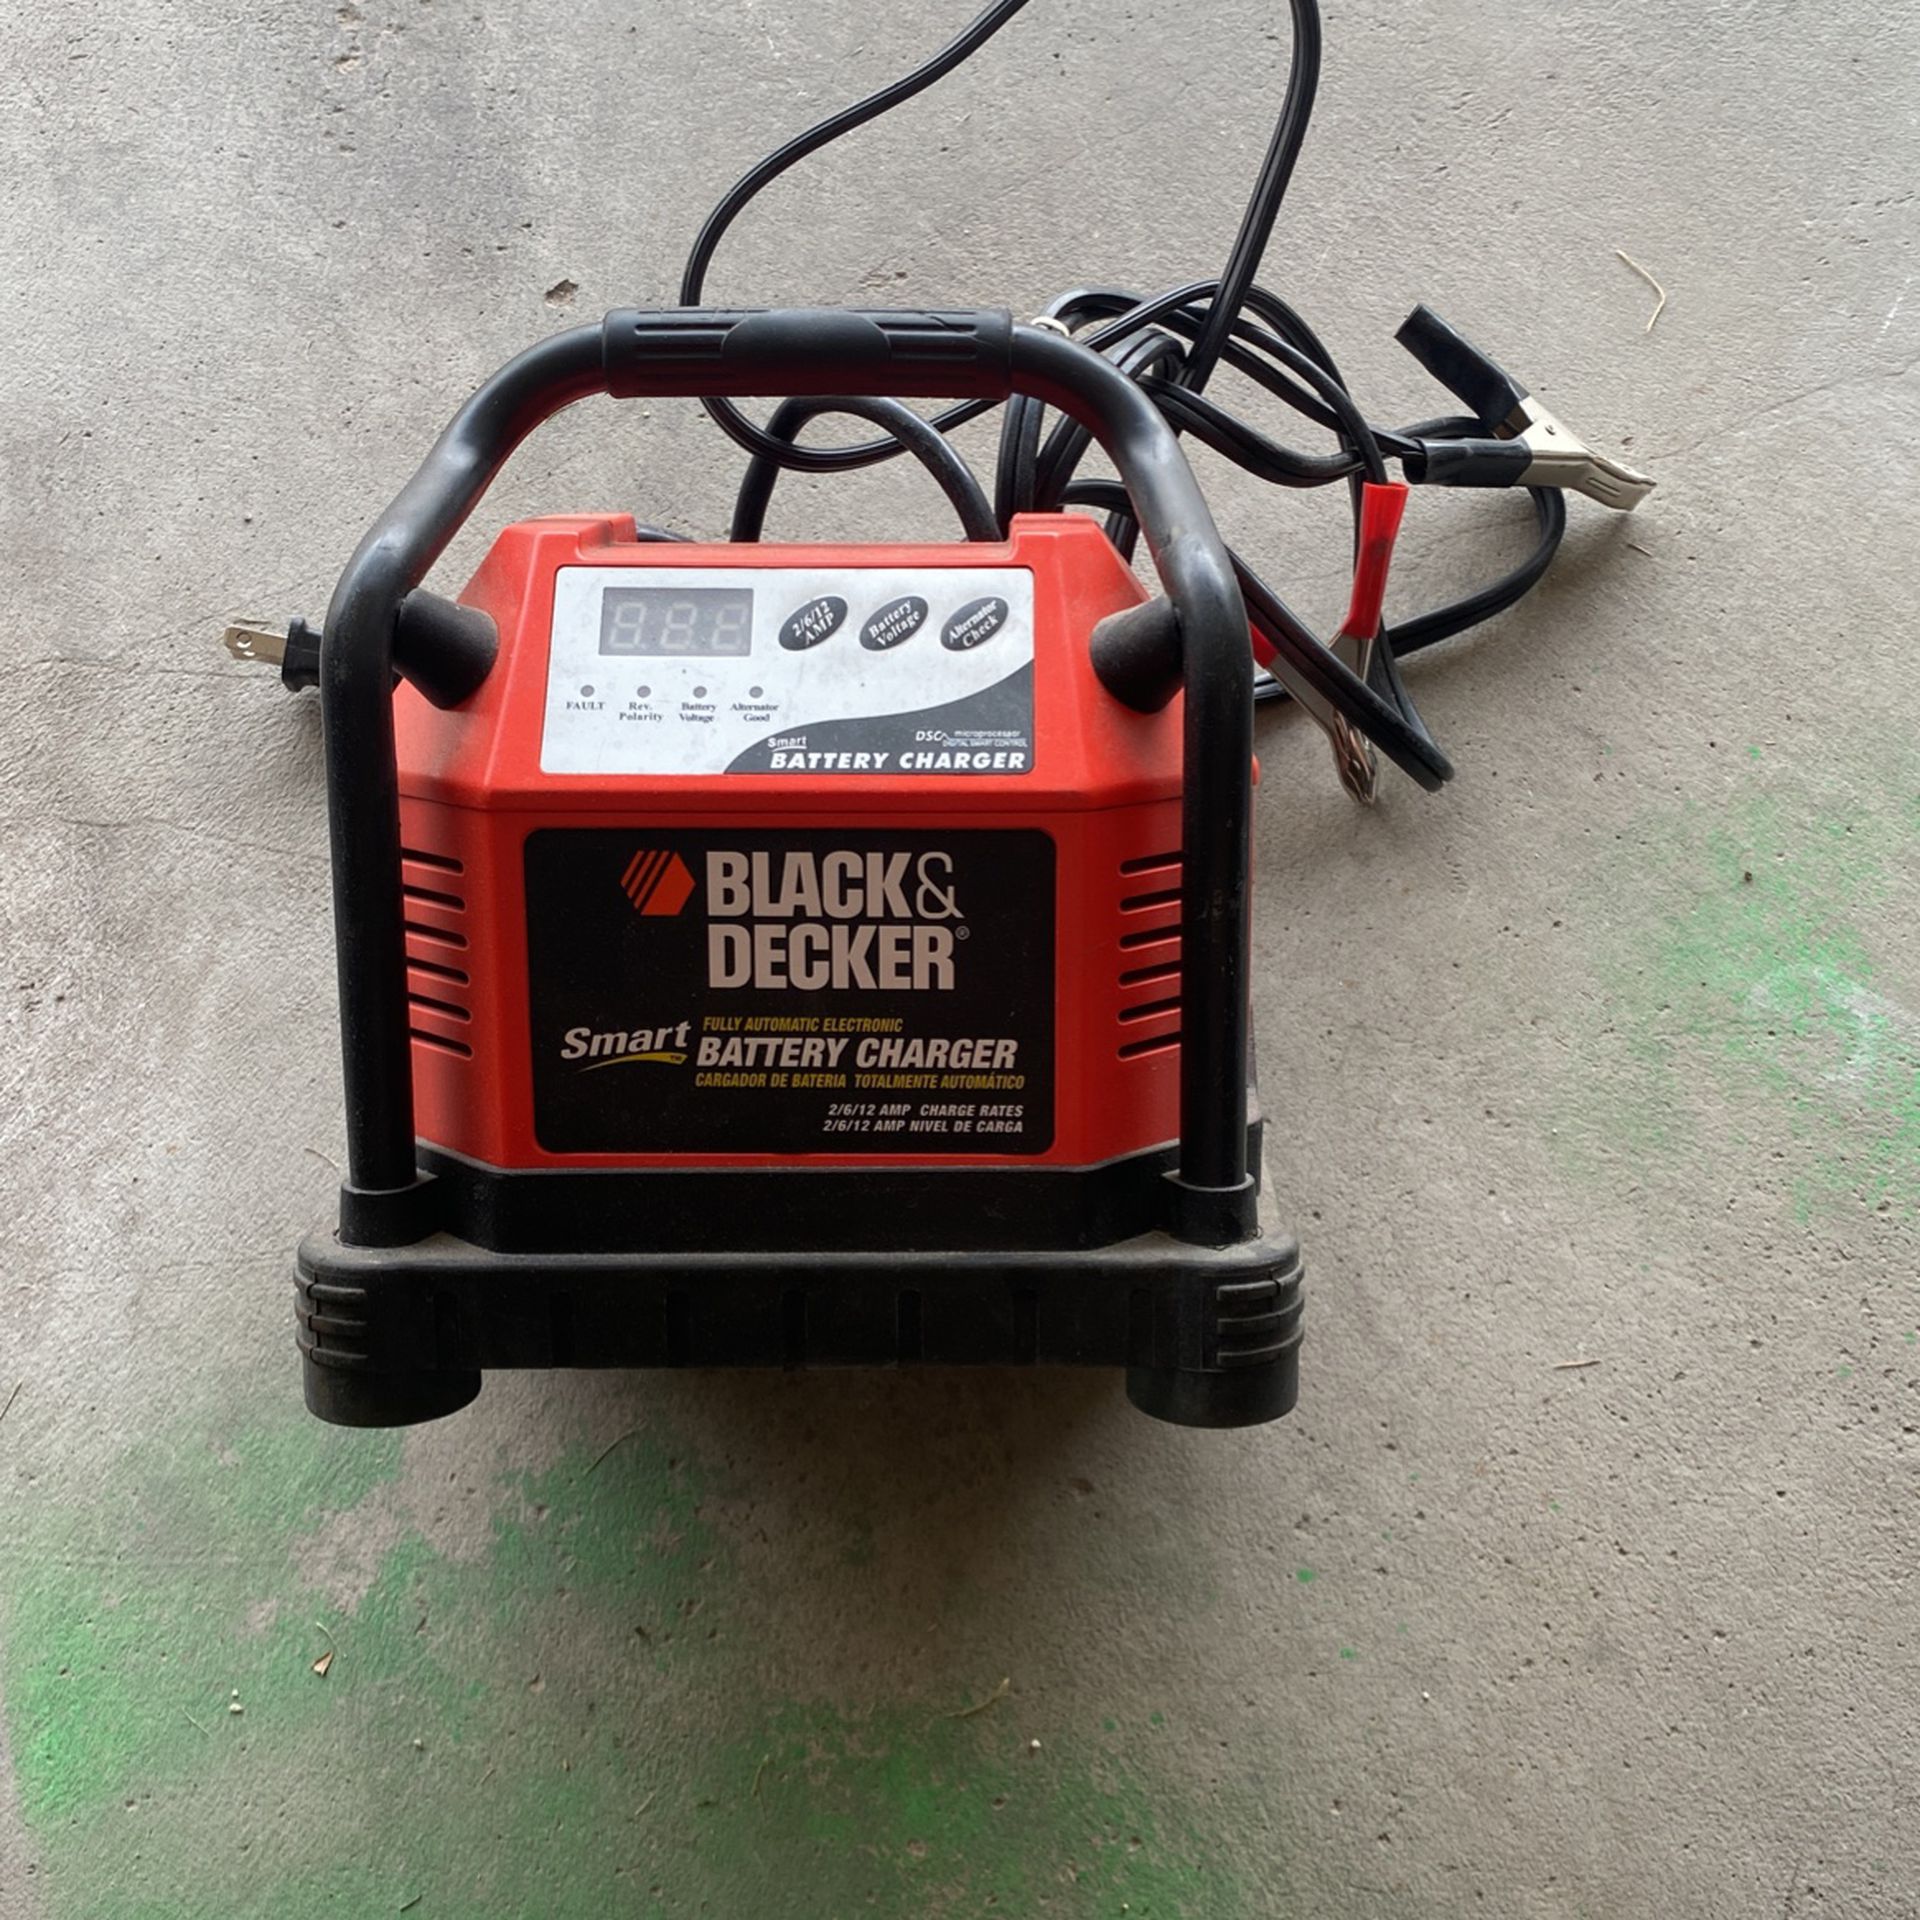 Black & Decker 6 Amp/4 Amp/2 Amp Automatic Electronic Smart Battery Charger